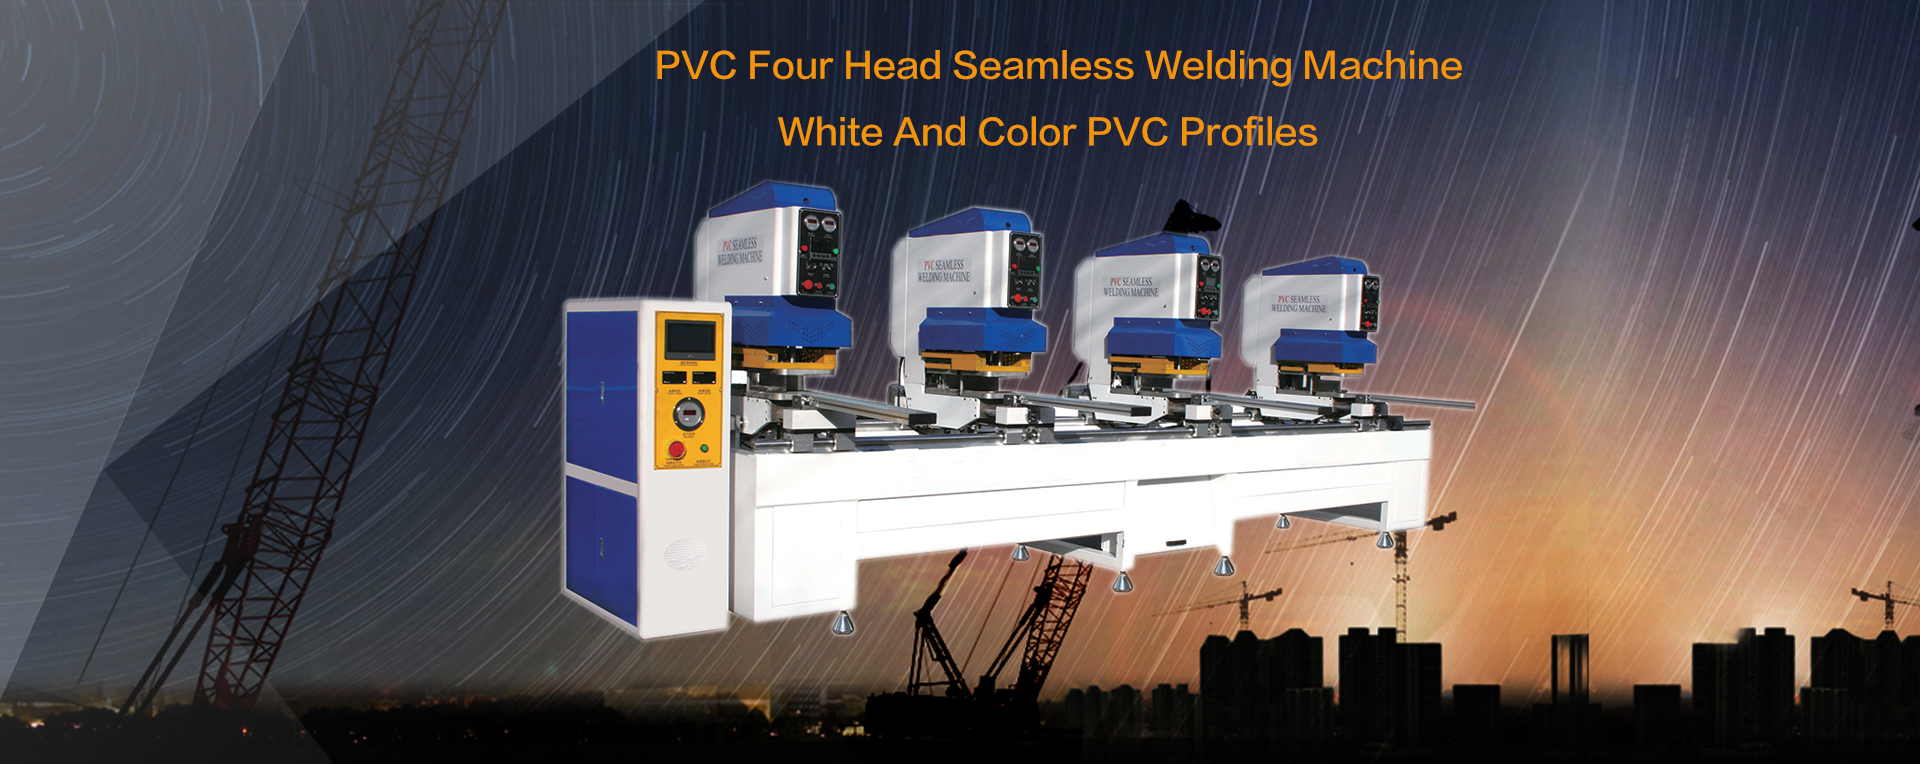 PVC Four Head Seamless Welding Machine White And Color PVC Profiles